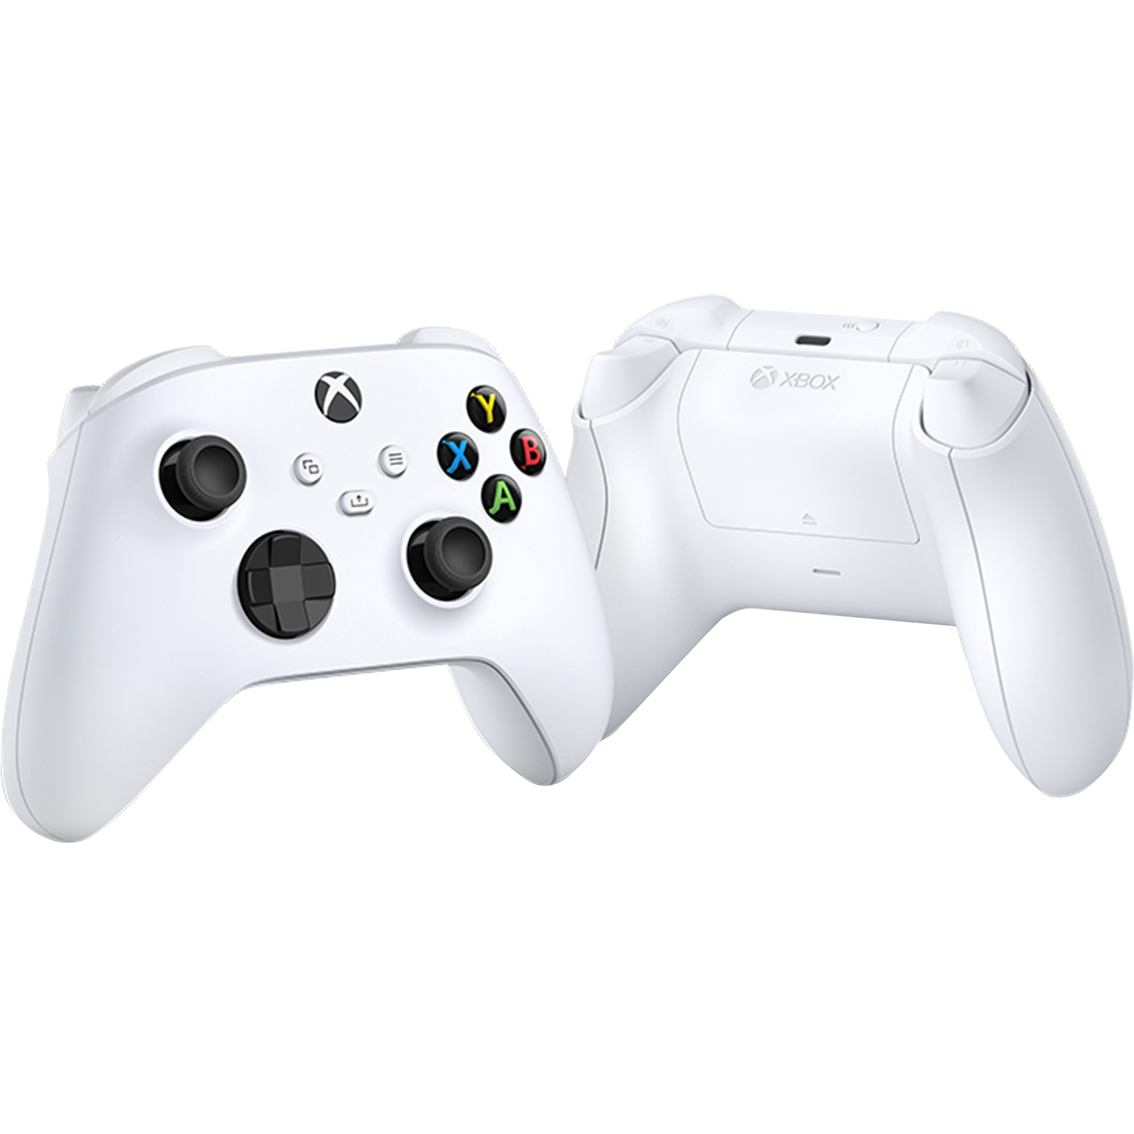  Microsoft Xbox Wireless Controller + Wireless Adapter for  Windows 10 - USB Adapter Included - Bluetooth Connectivity - Connect up to  8 Controllers - Quickly pair & switch between platforms : Video Games